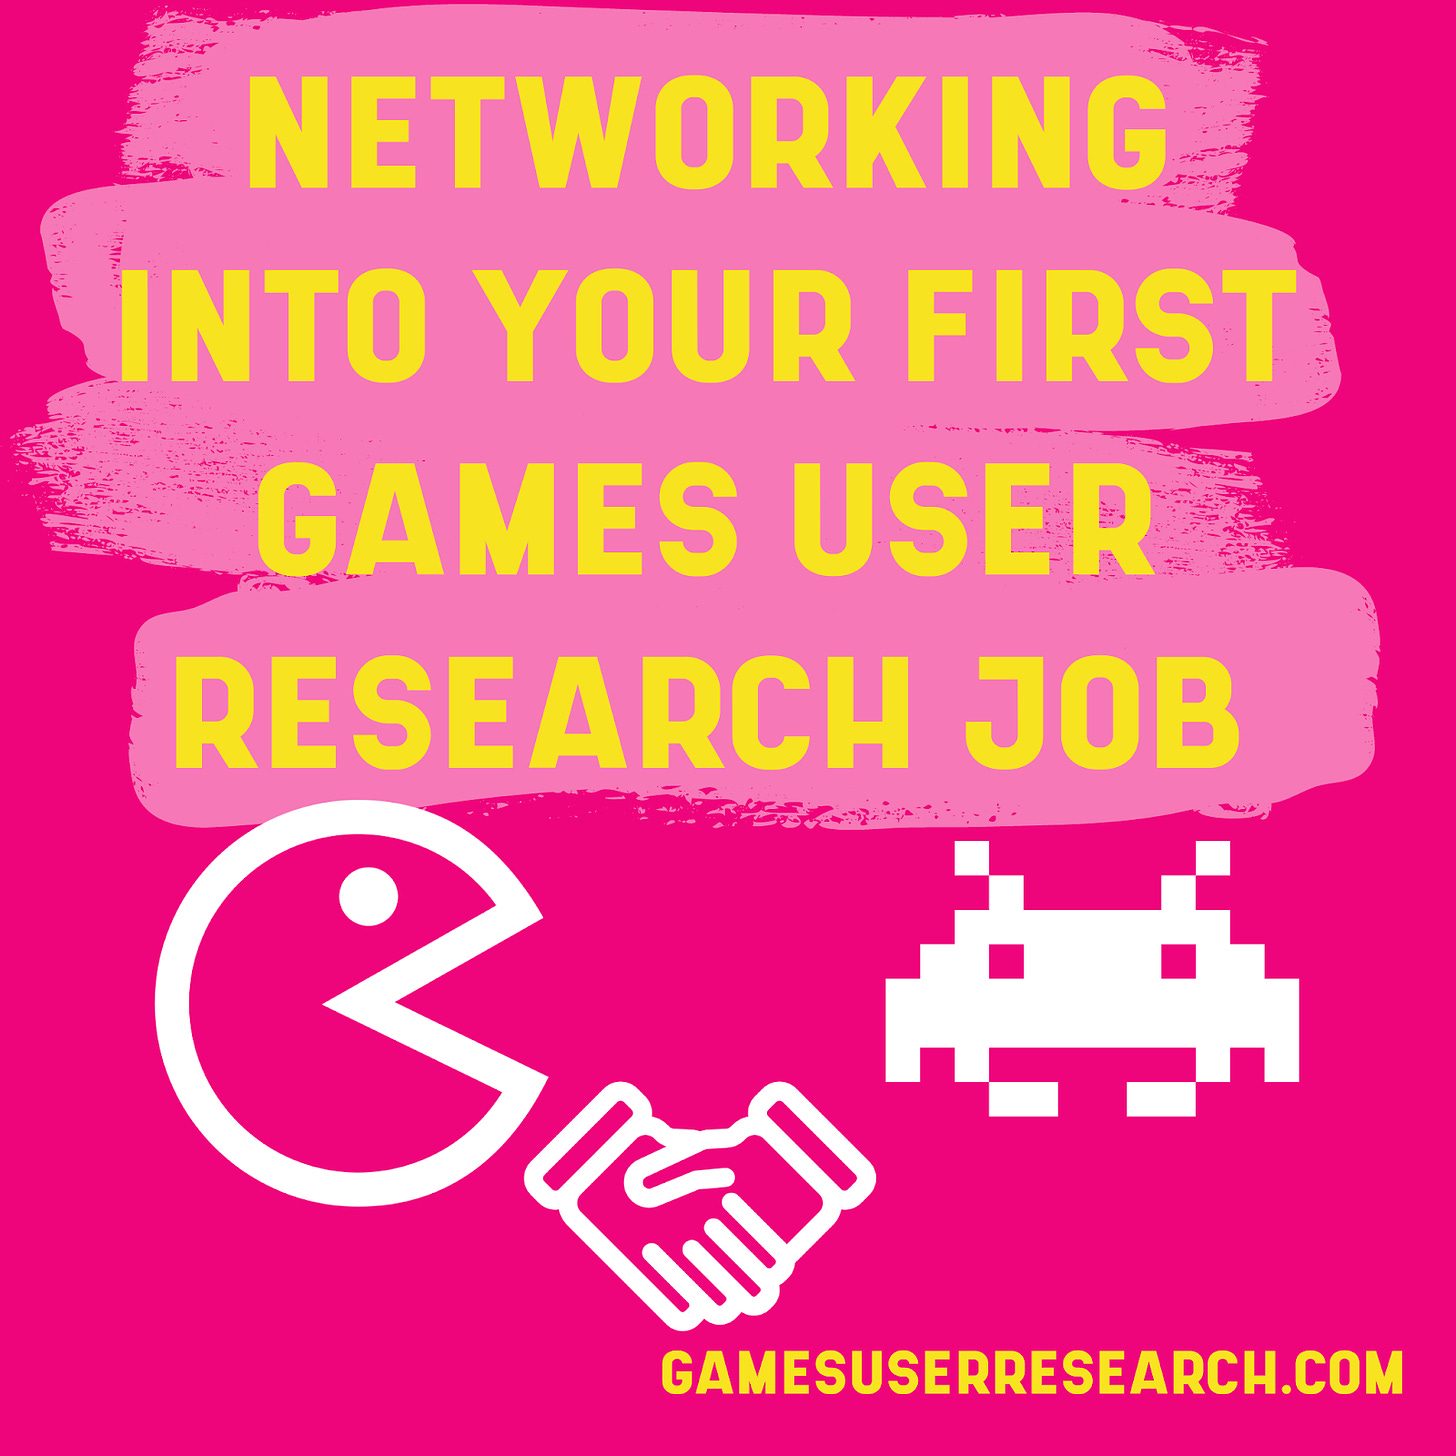 Networking into your first GUR job